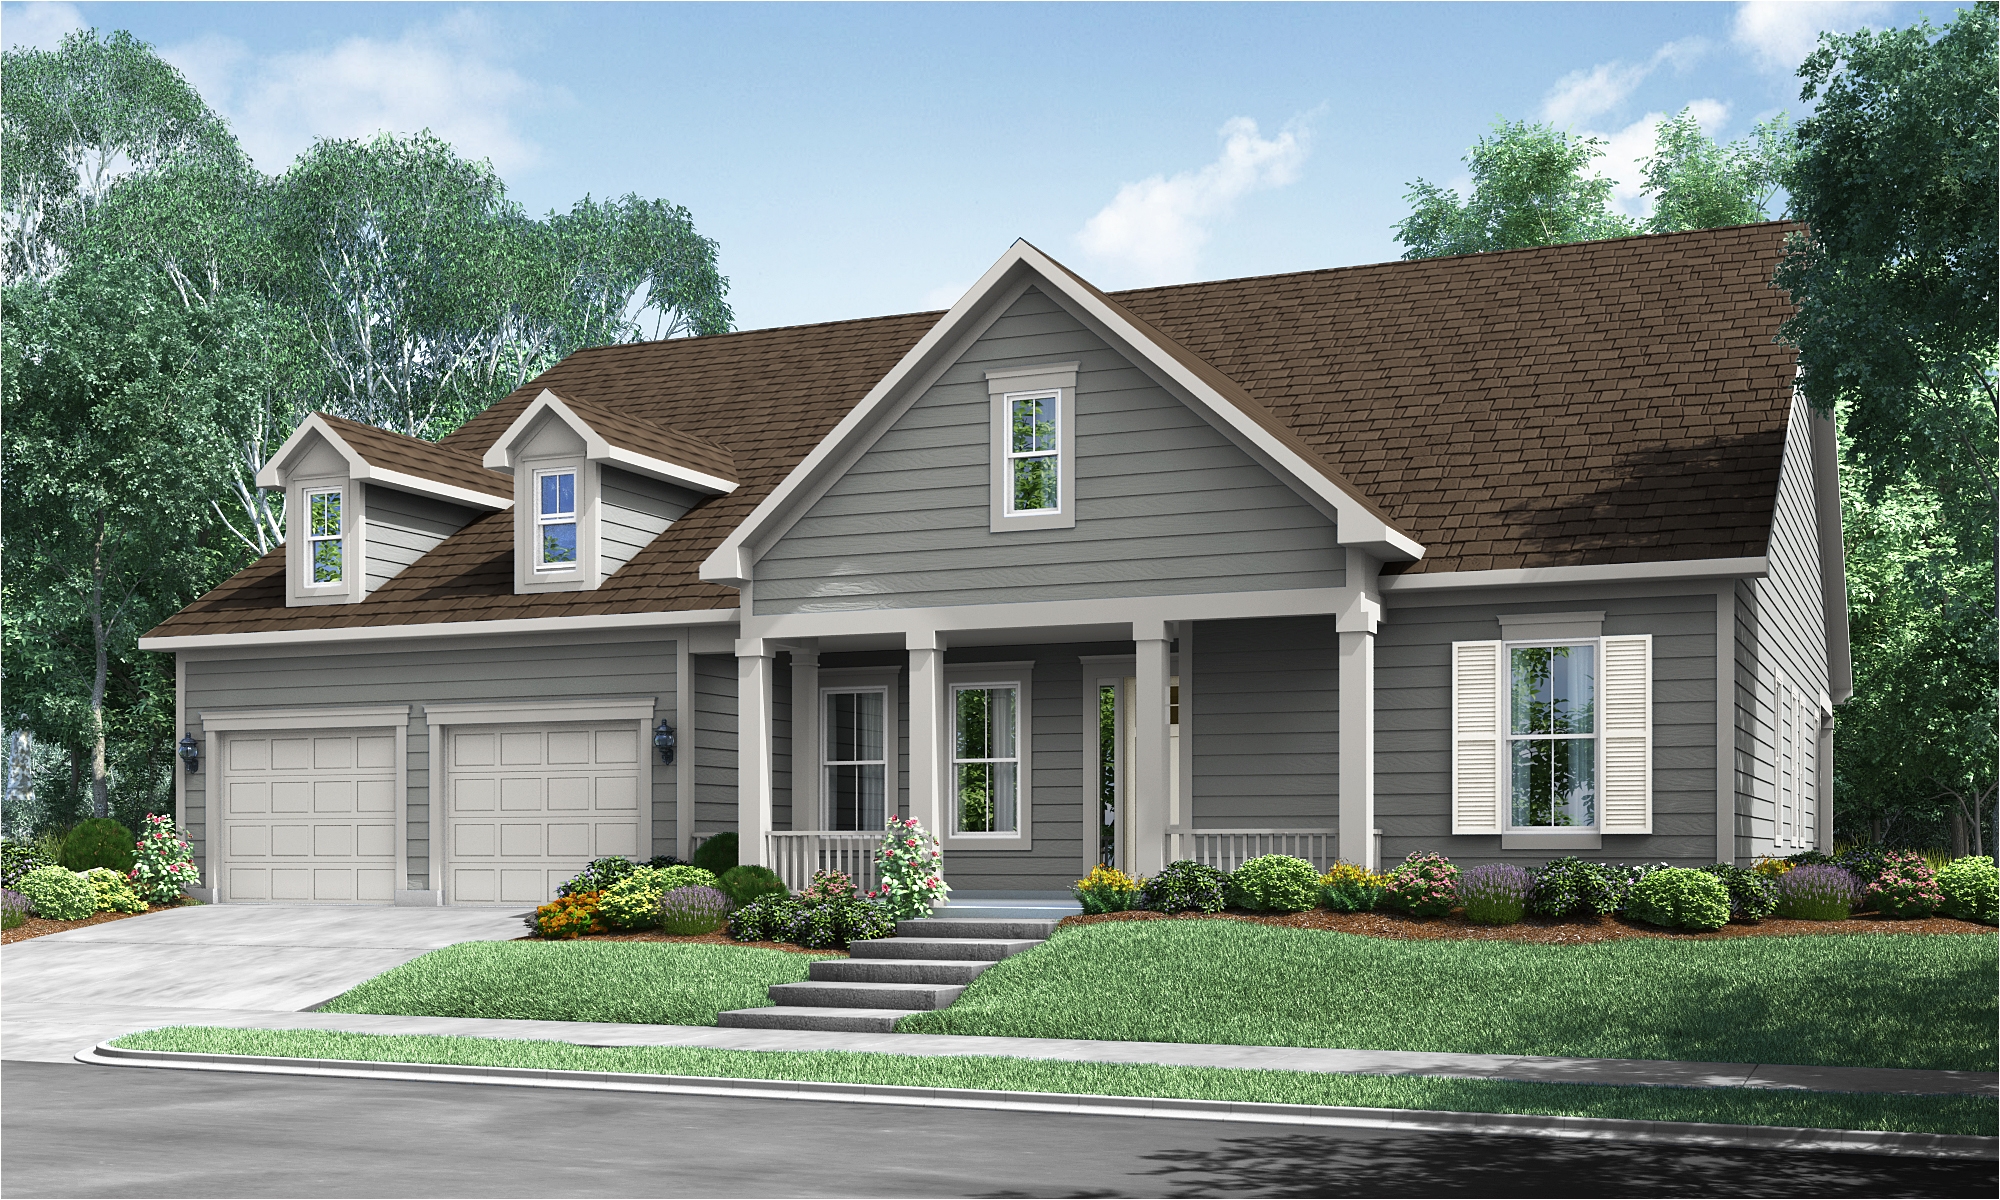 fielding homes new home plans in raleigh durham chapel hill nc newhomesource